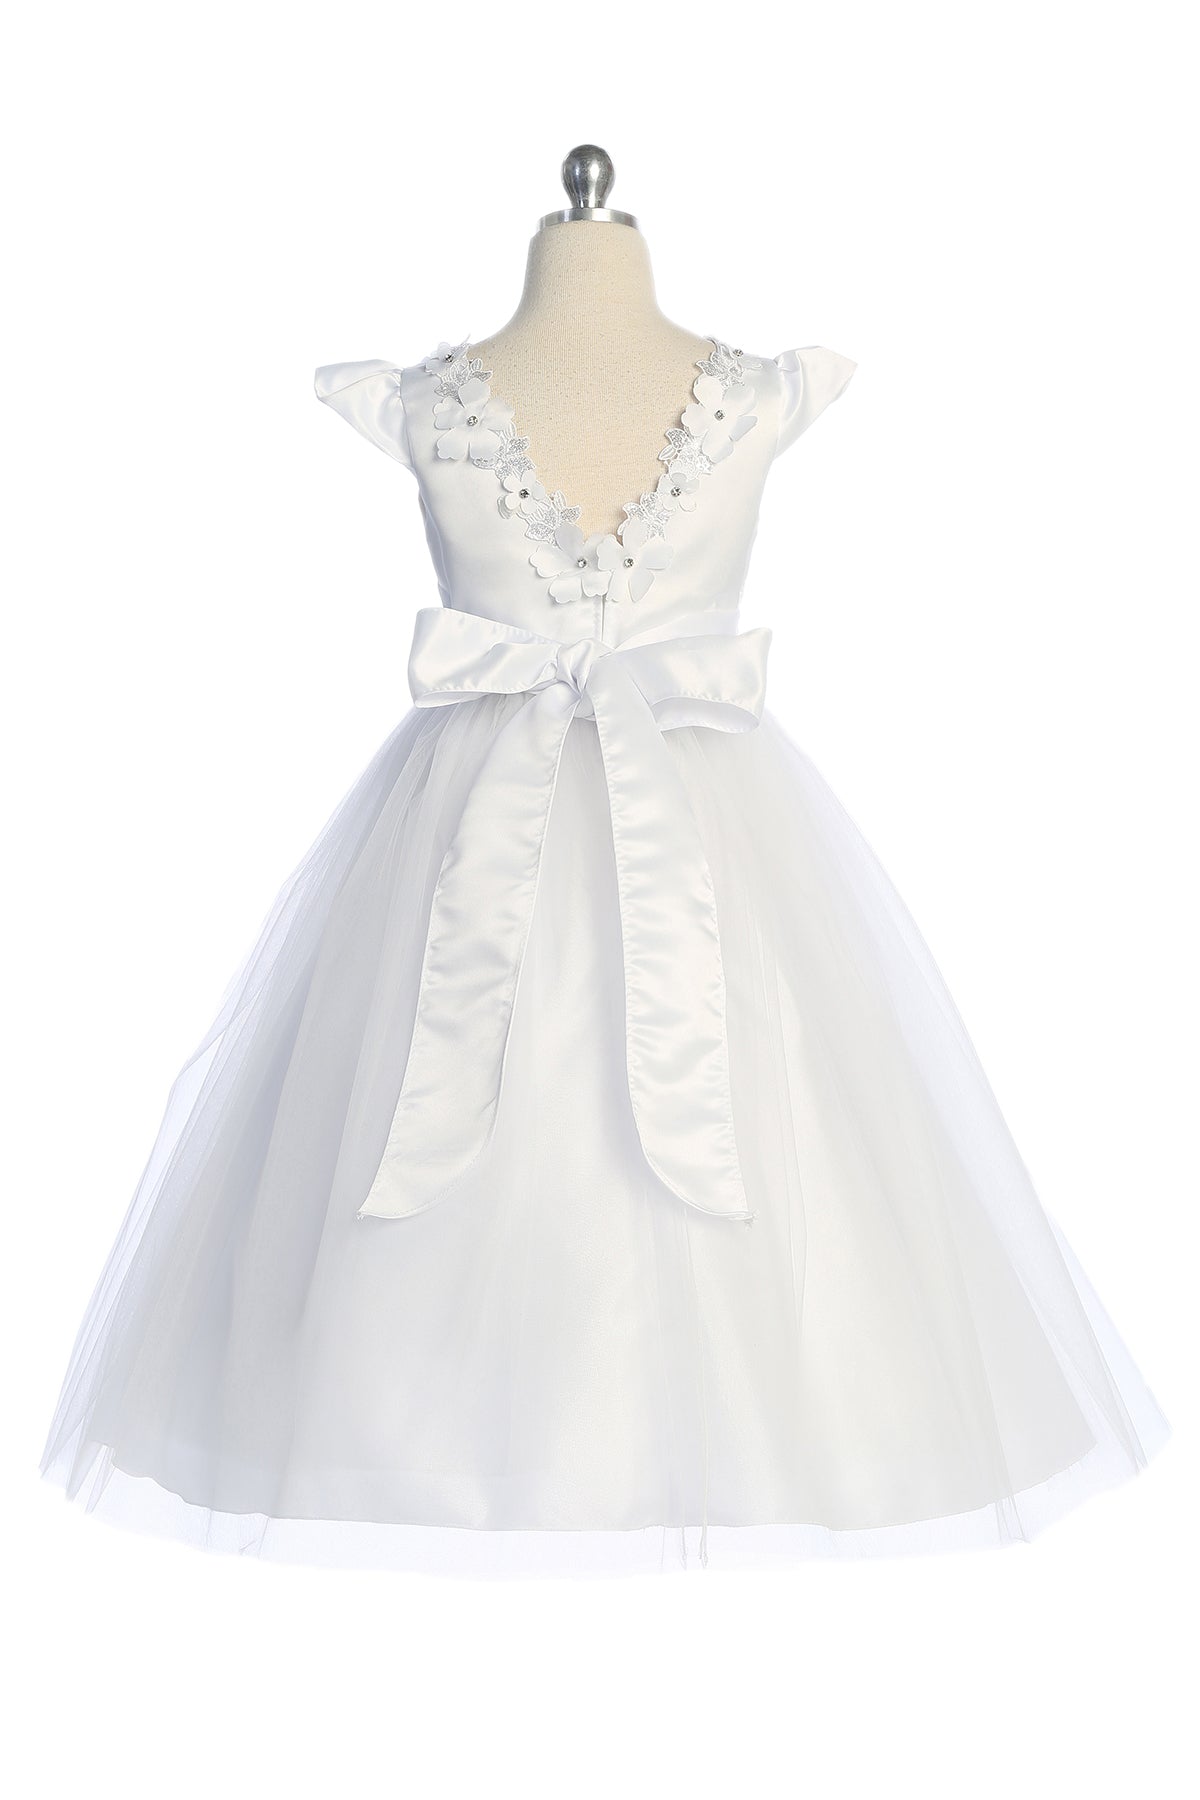 562 Capped Sleeve Satin & Tulle Girls Dress with Floral Trim and Plus Sizes